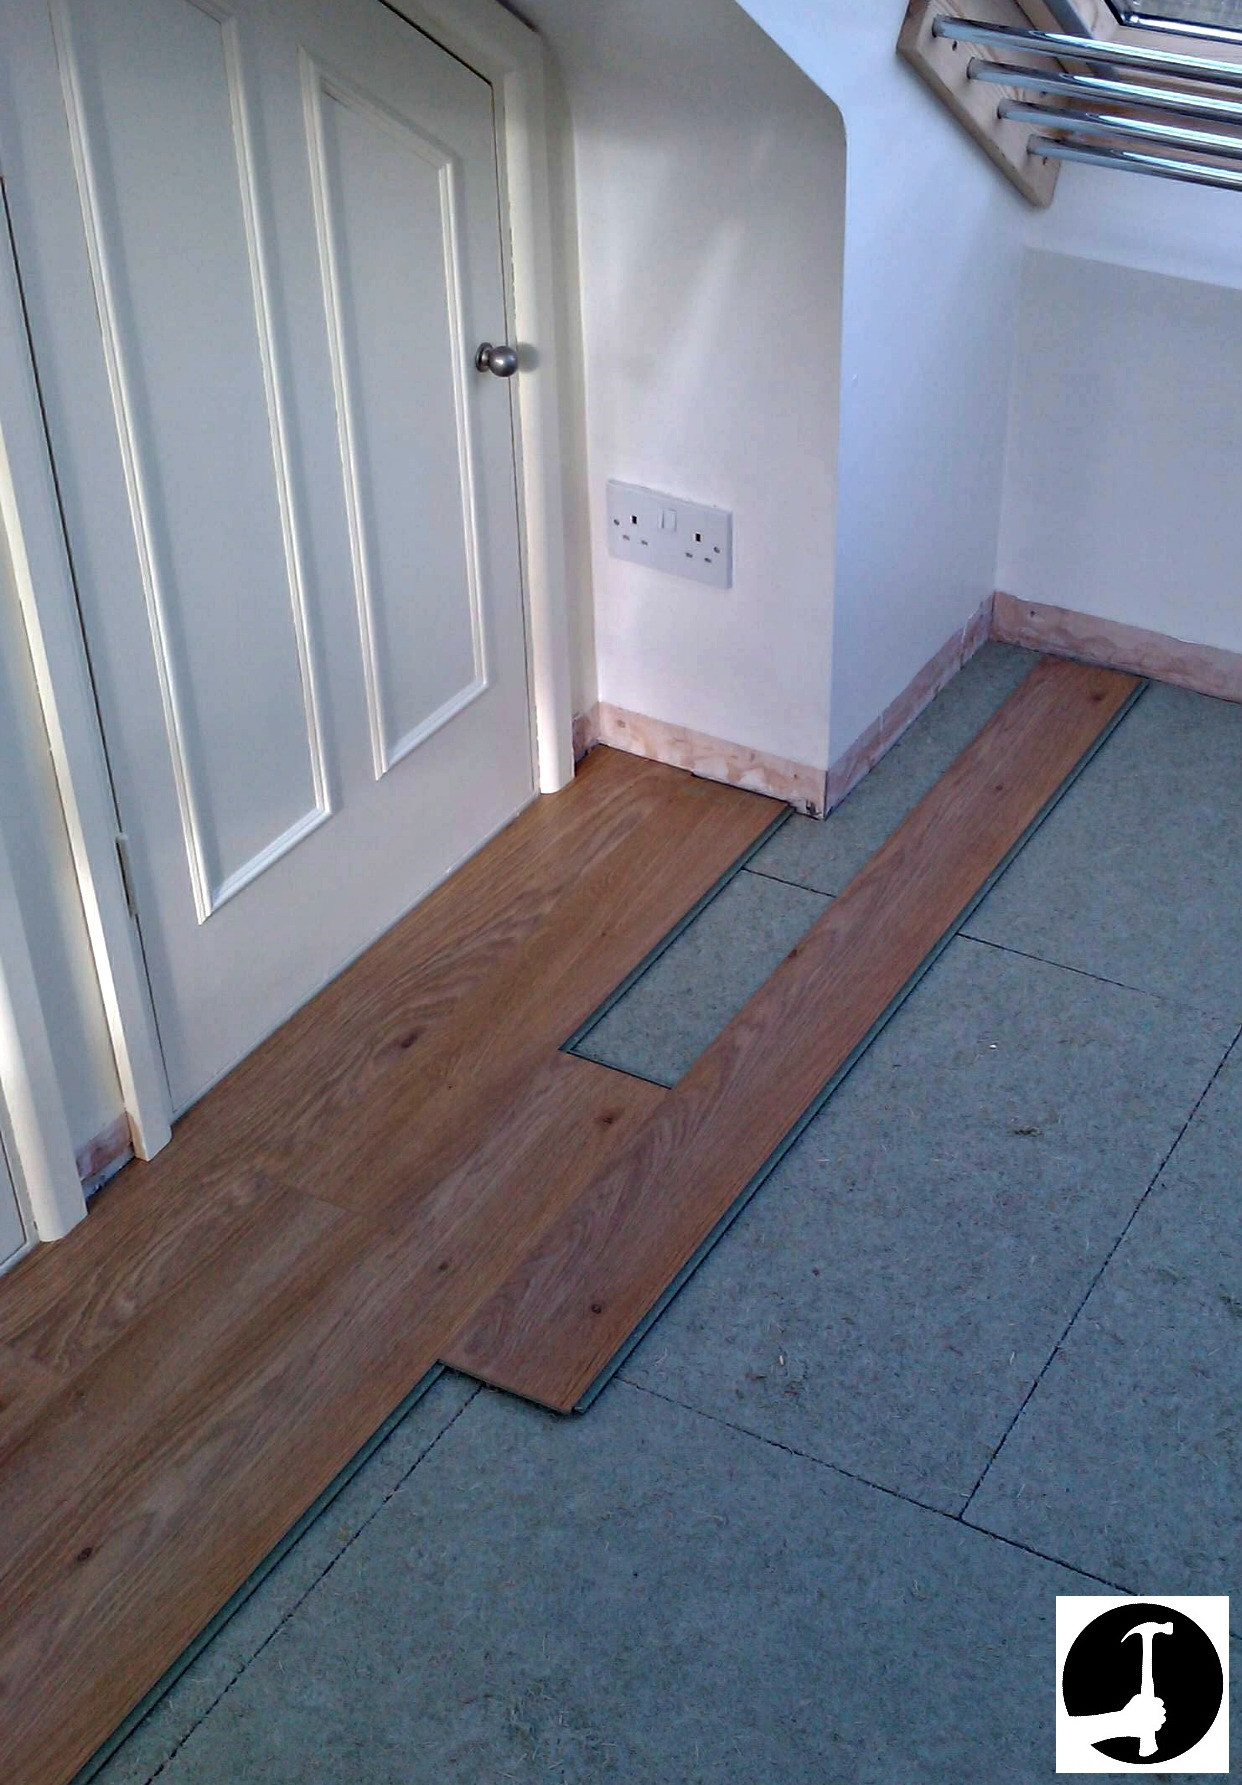 14 Lovely Hardwood Floor Installation New York City 2024 free download hardwood floor installation new york city of how to install laminate flooring with ease glued glue less systems inside setting out laminate flooring